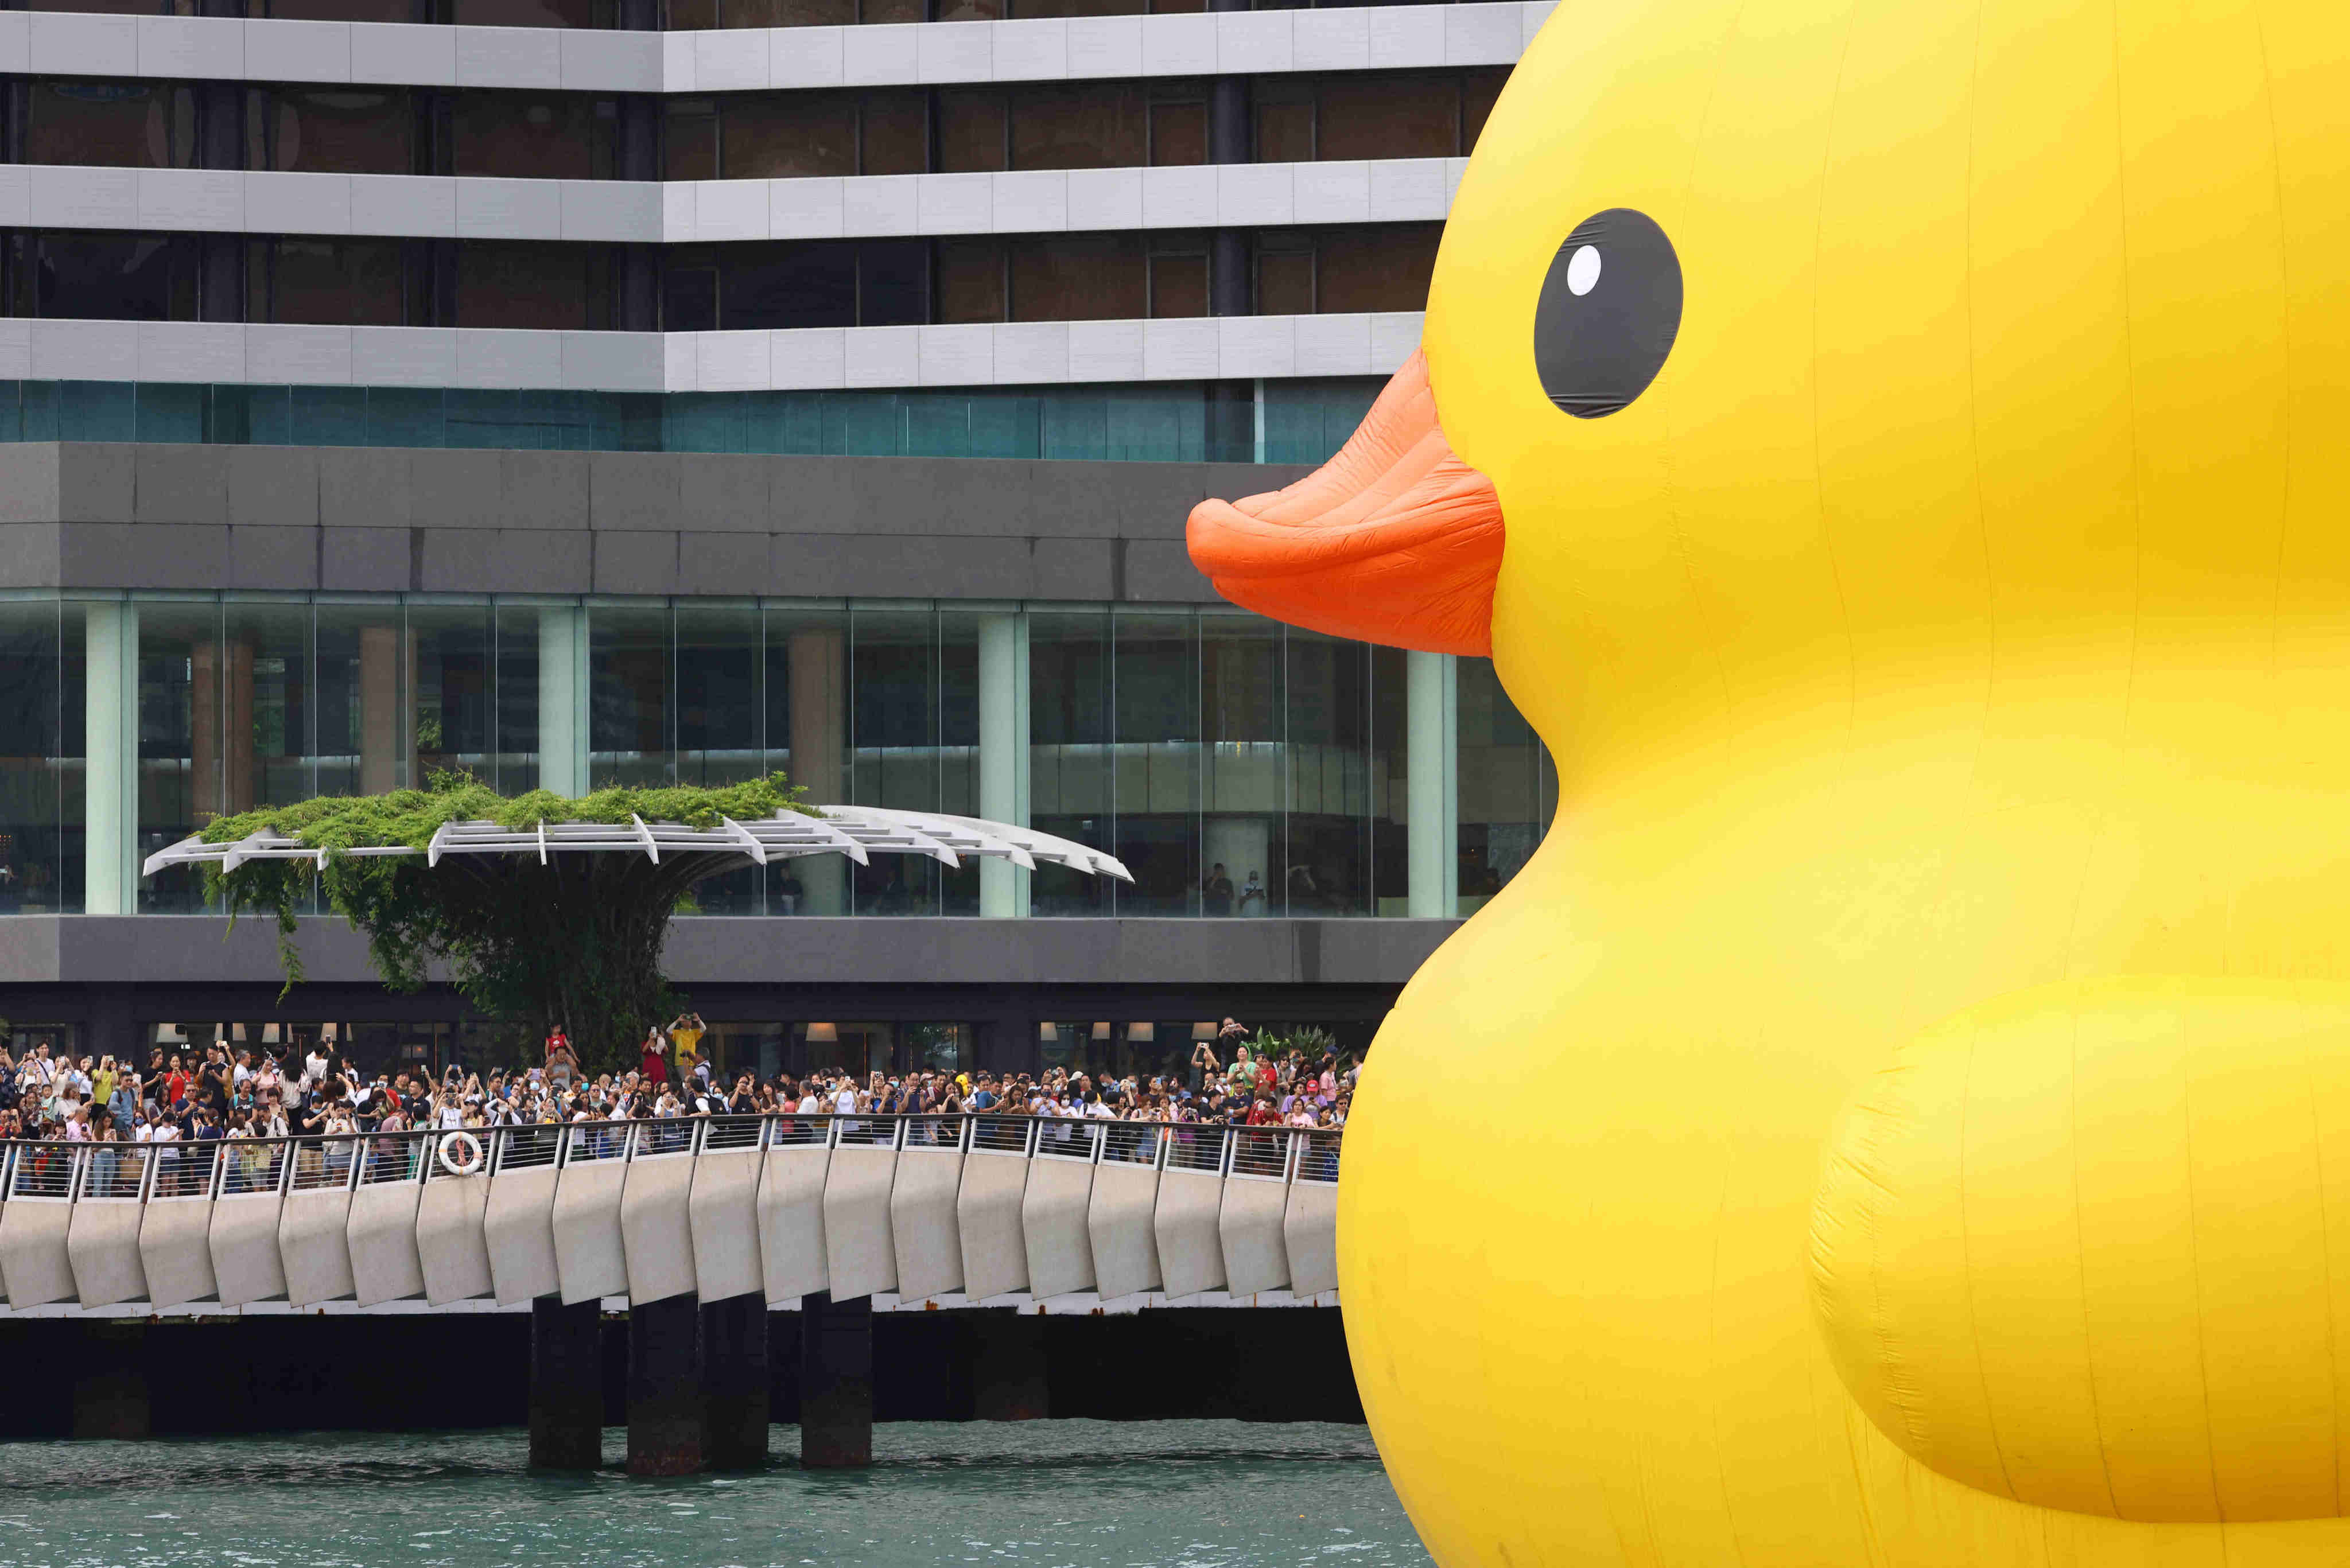 Sunday marks the last time the rubber duck duo can be seen together in Hong Kong. Photo: Dickson Lee